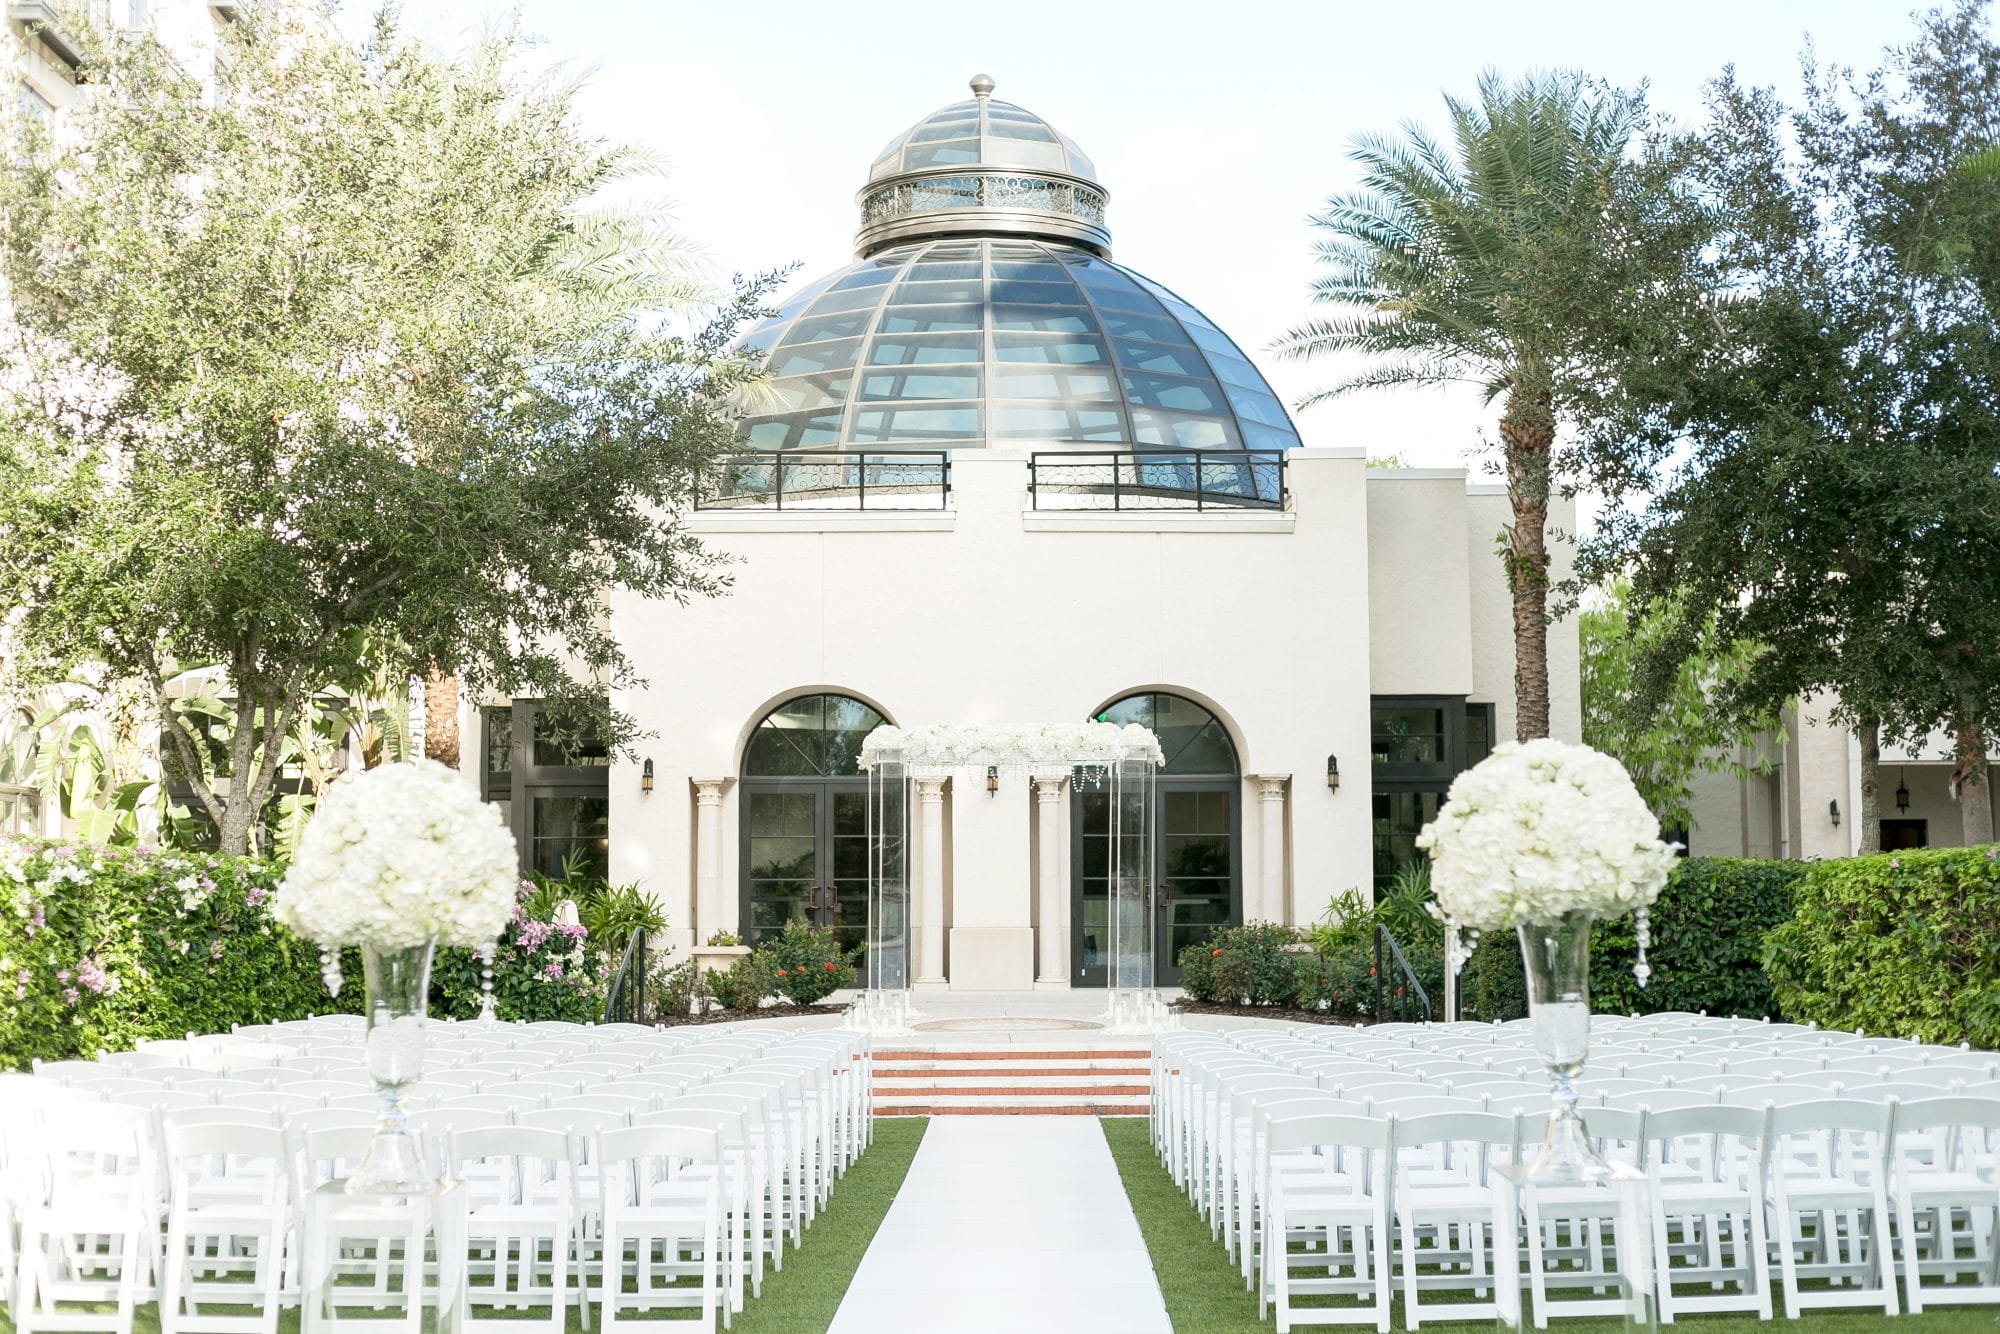 The Alfond Inn - outdoor ceremony in front of glass-domed building